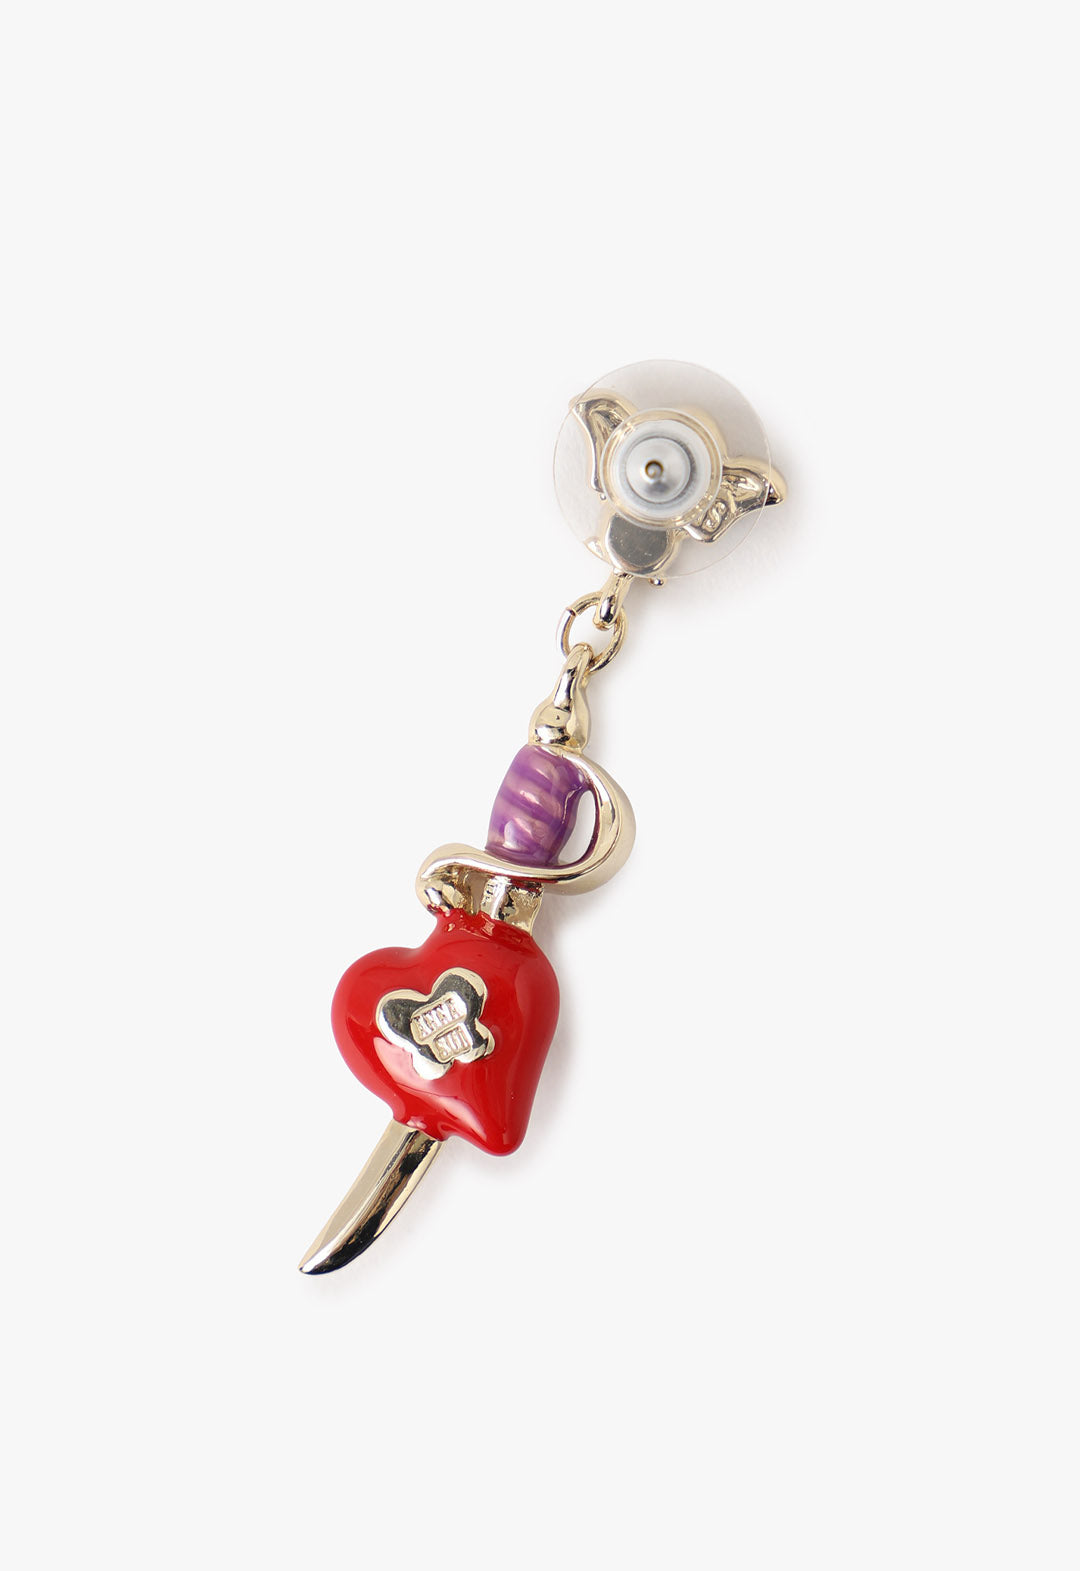 Skull Heart Earing Red, the other earing is a pirate saber with purple grip come with a plastic protection